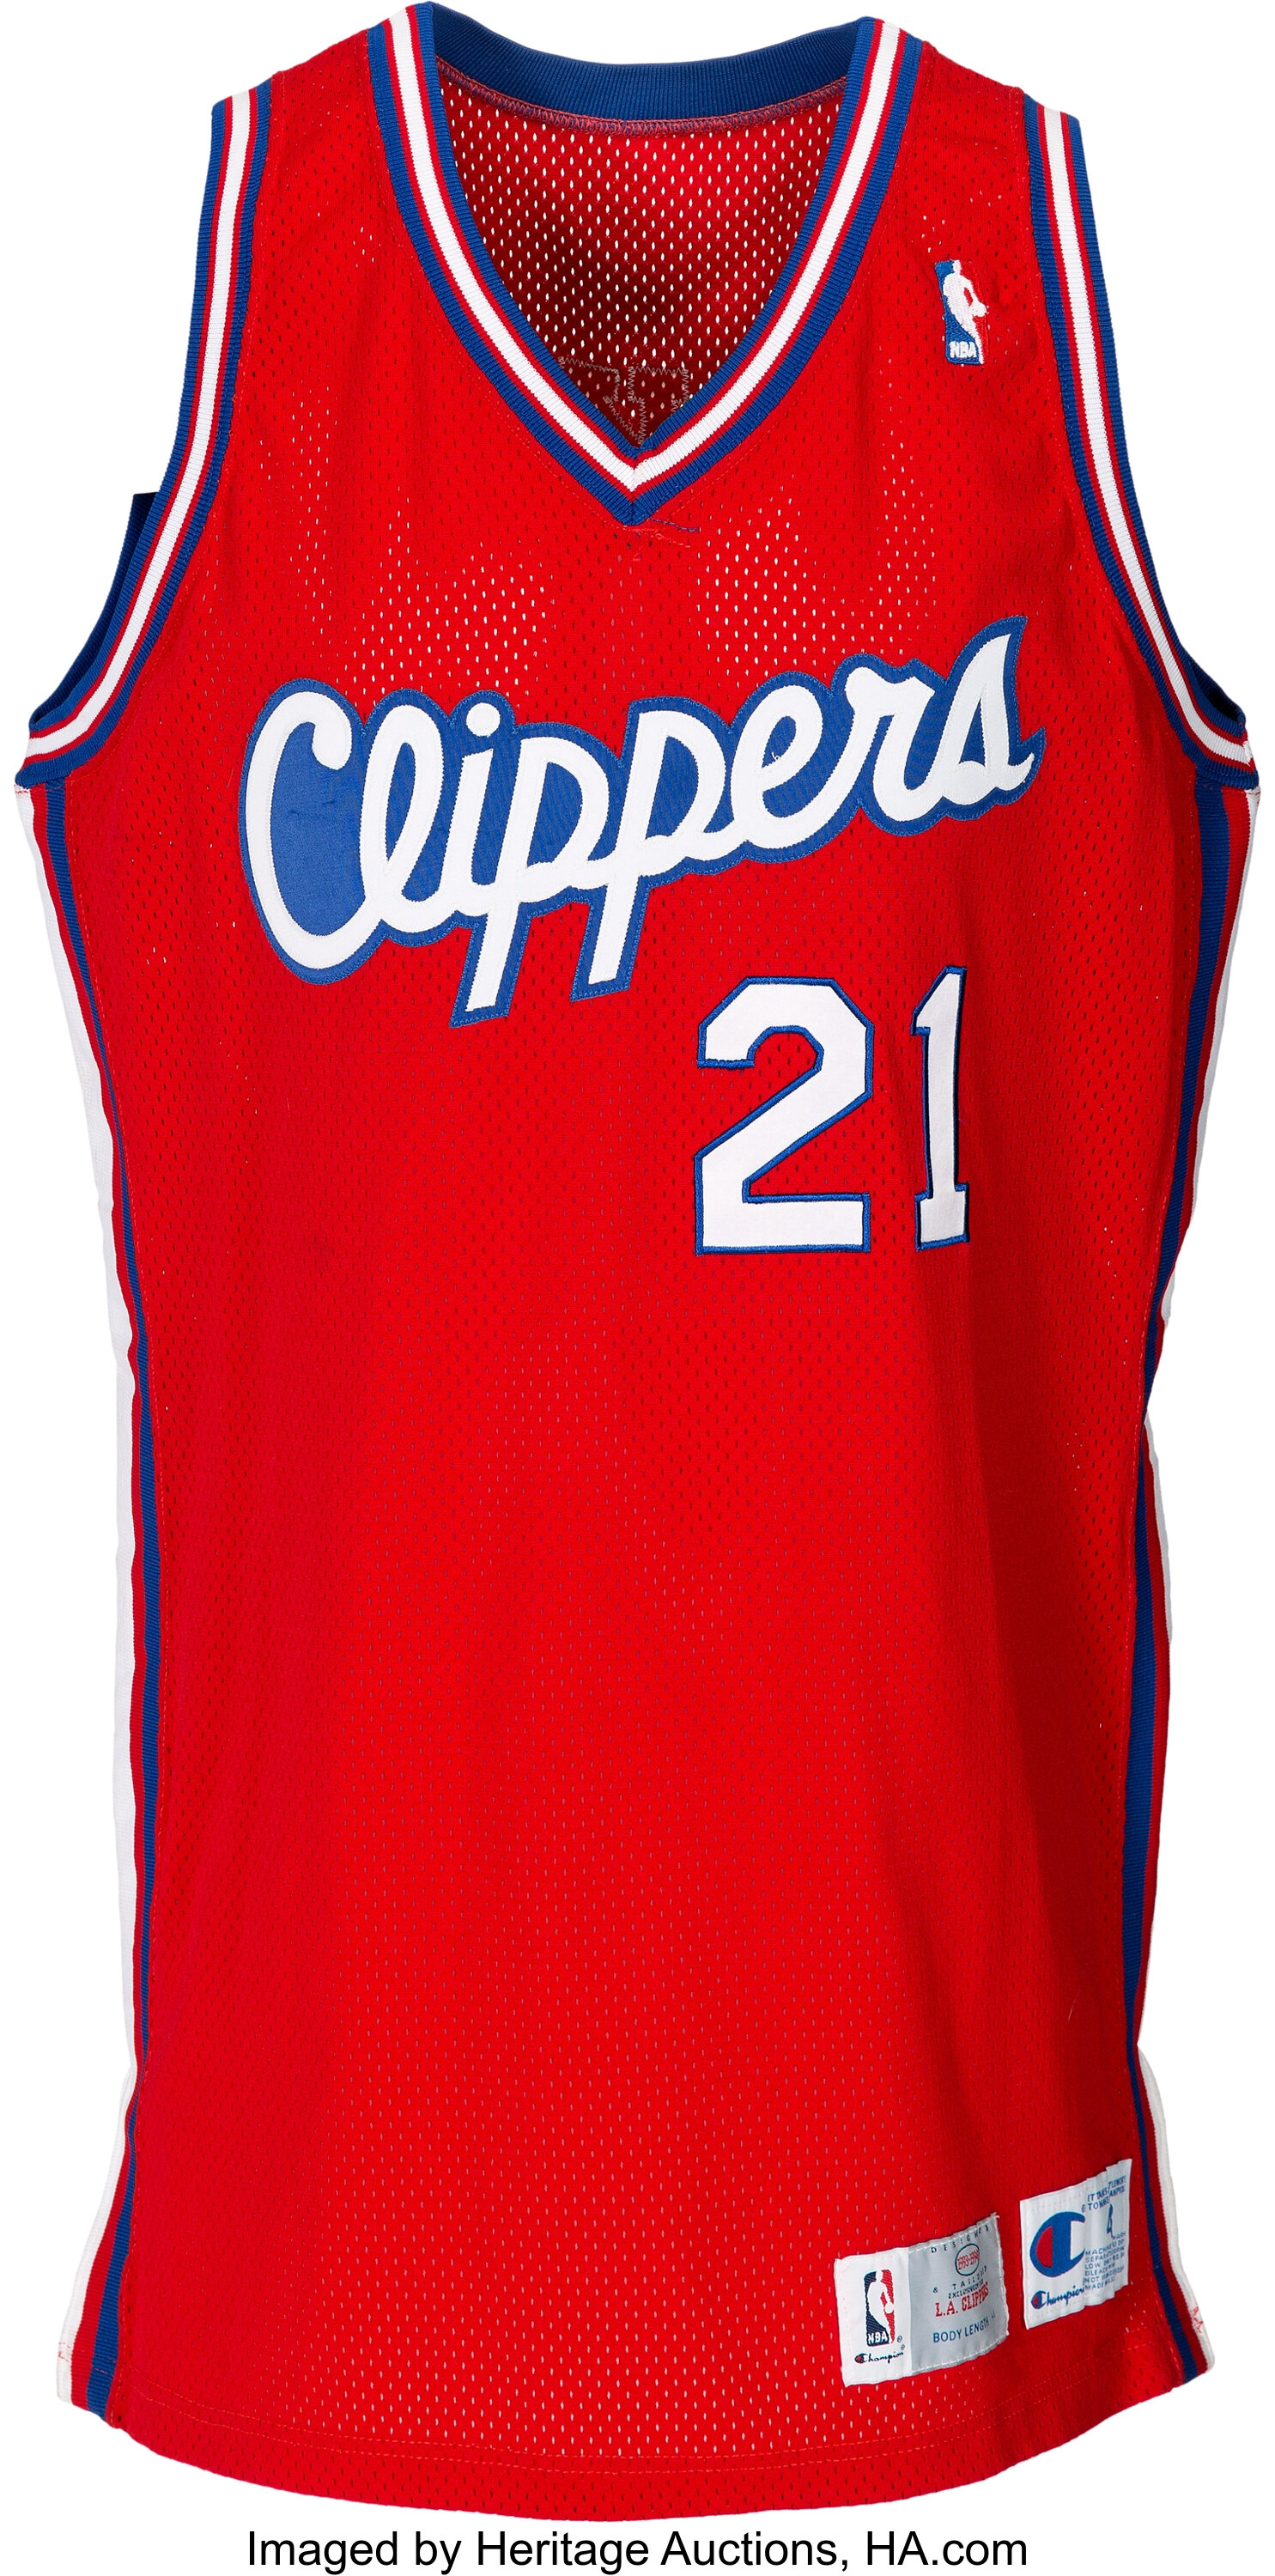 Los Angeles Clippers Jersey History - Basketball Jersey Archive